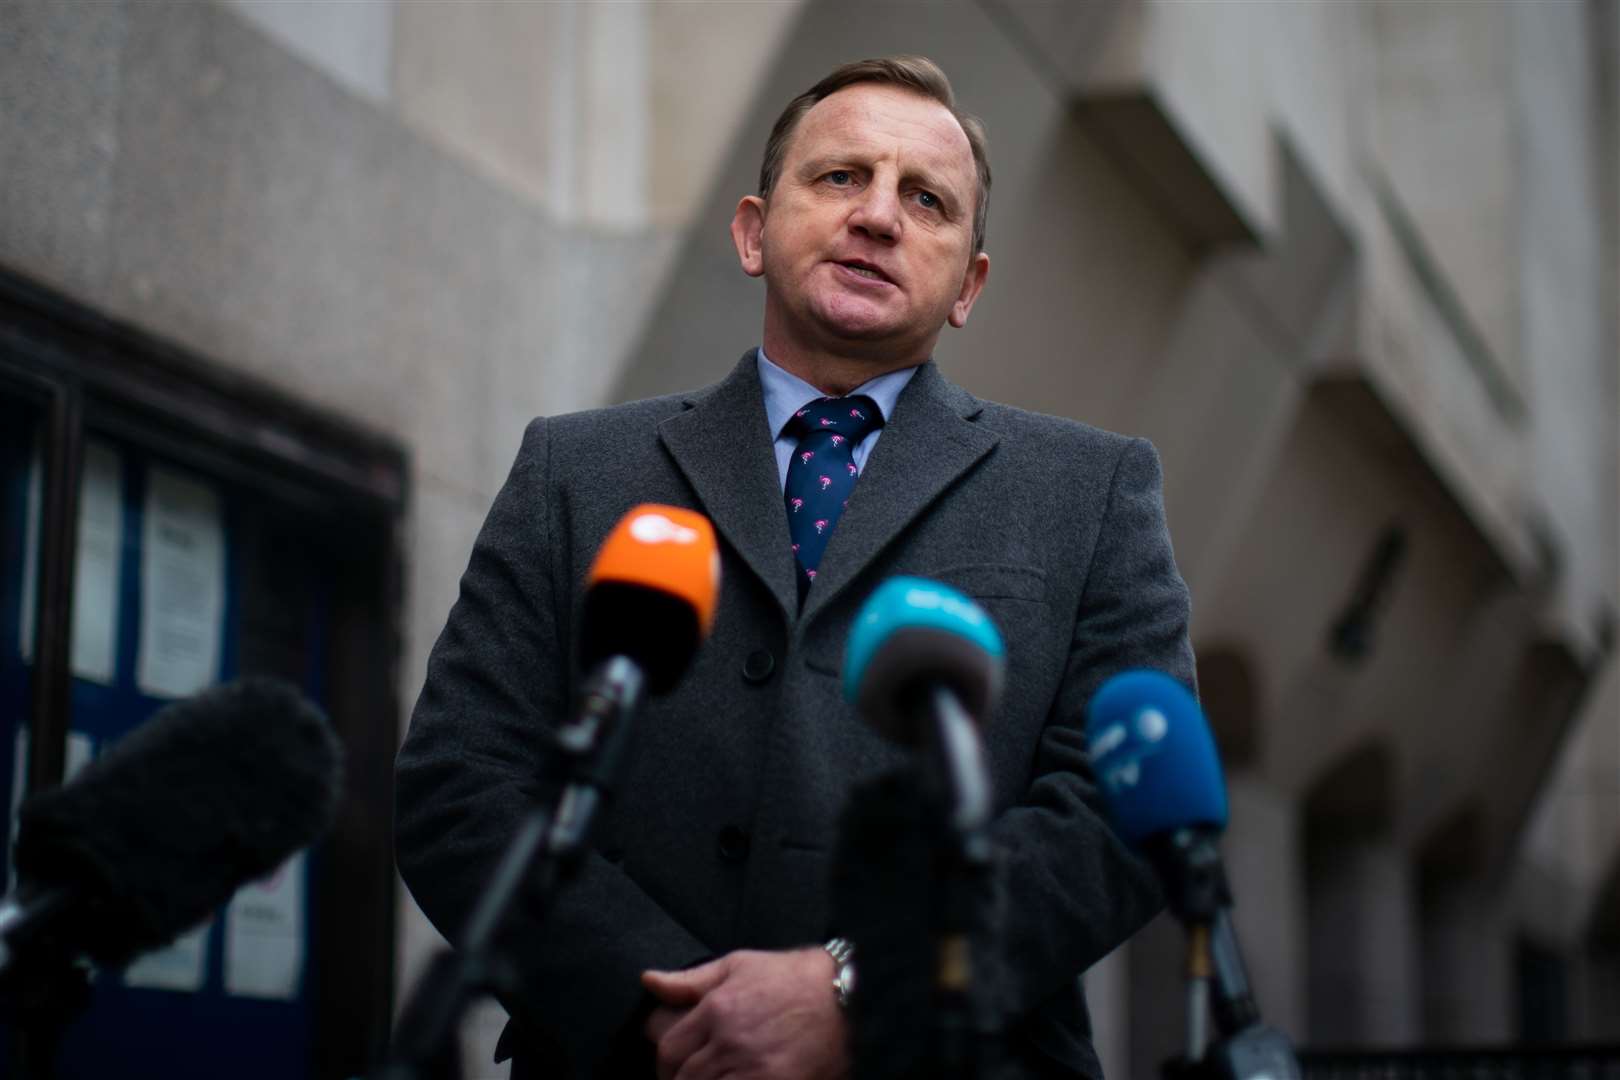 DCI Daniel Stoten gives a statement outside the Old Bailey (Aaron Chown/PA)